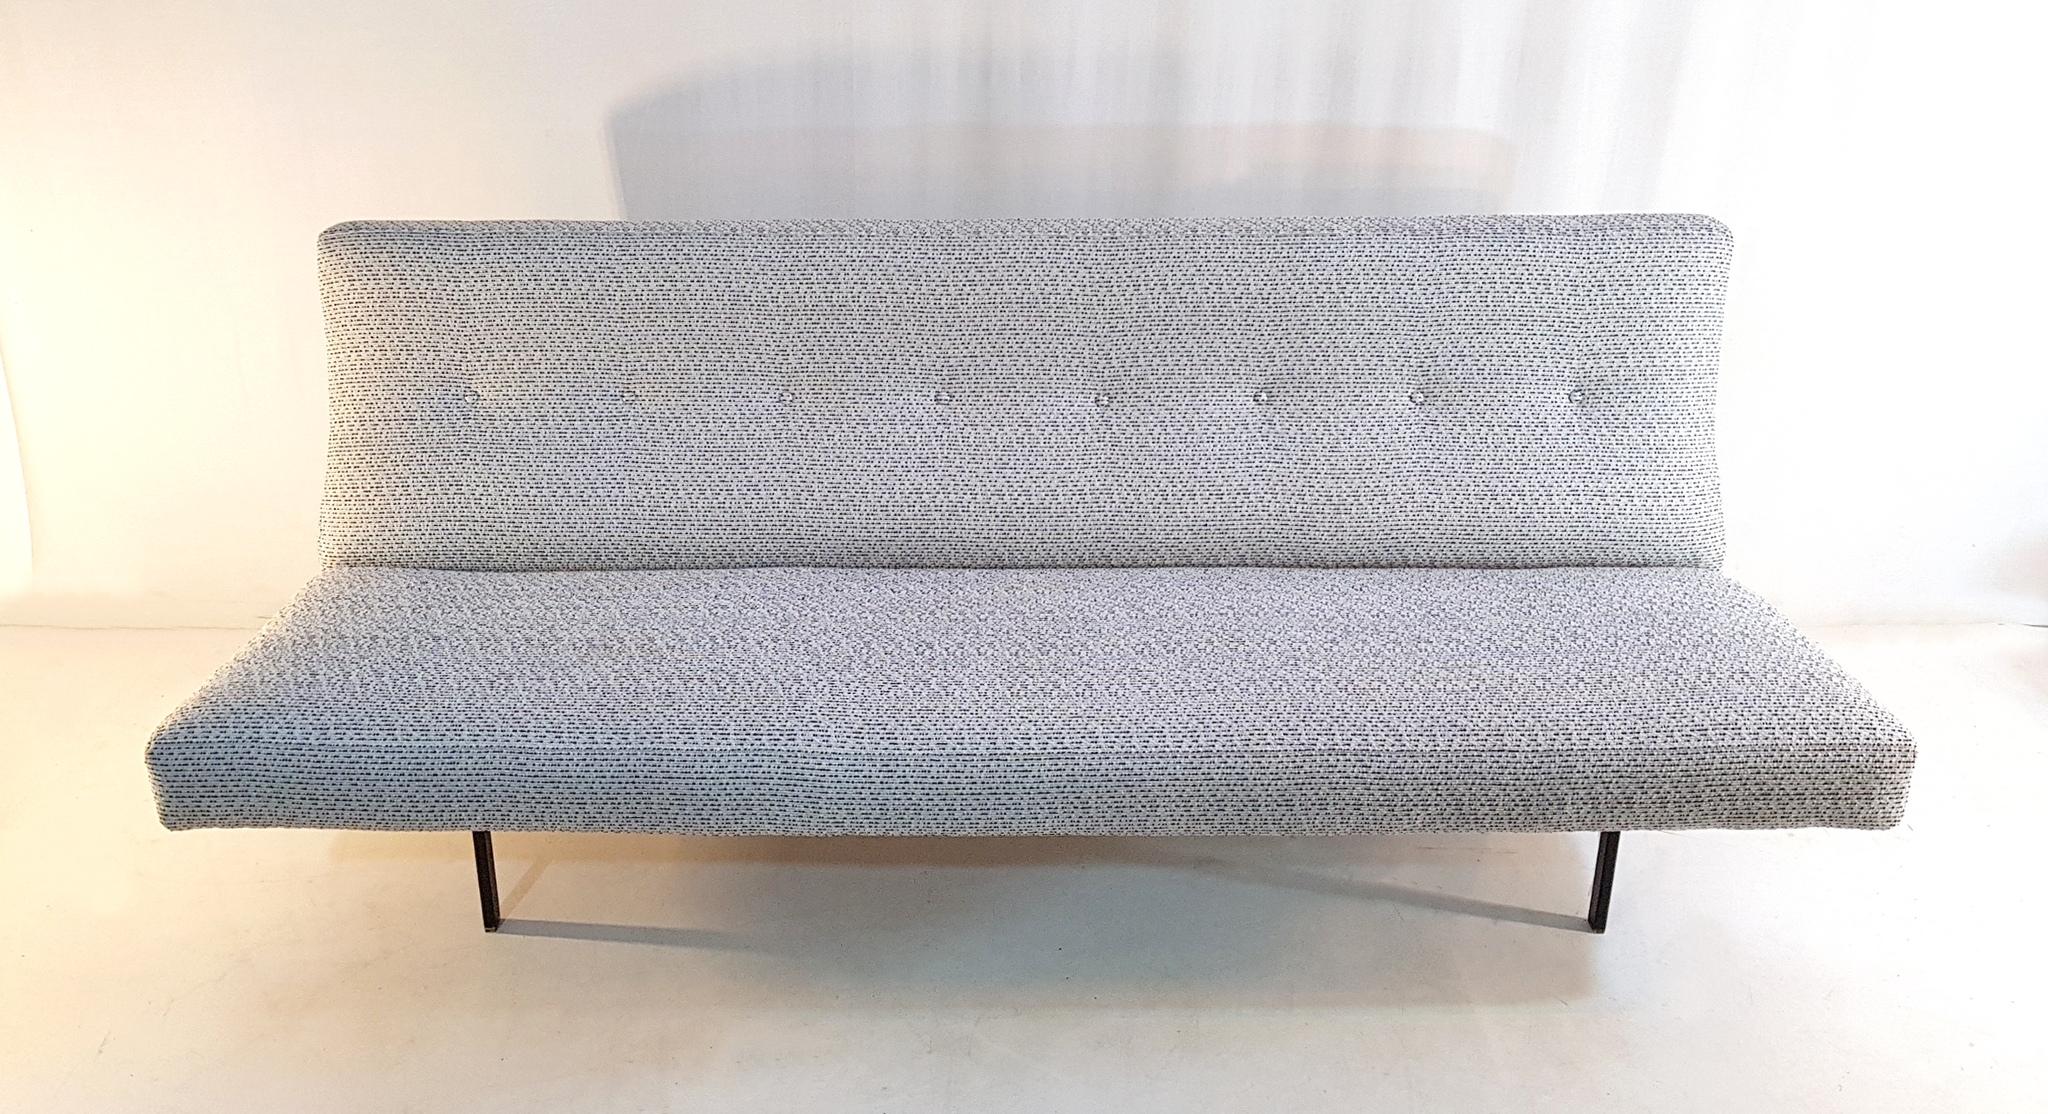 This Italian 1950s sofa has recently been professionally reupholstered in a strong quality fabric in black and white so called 